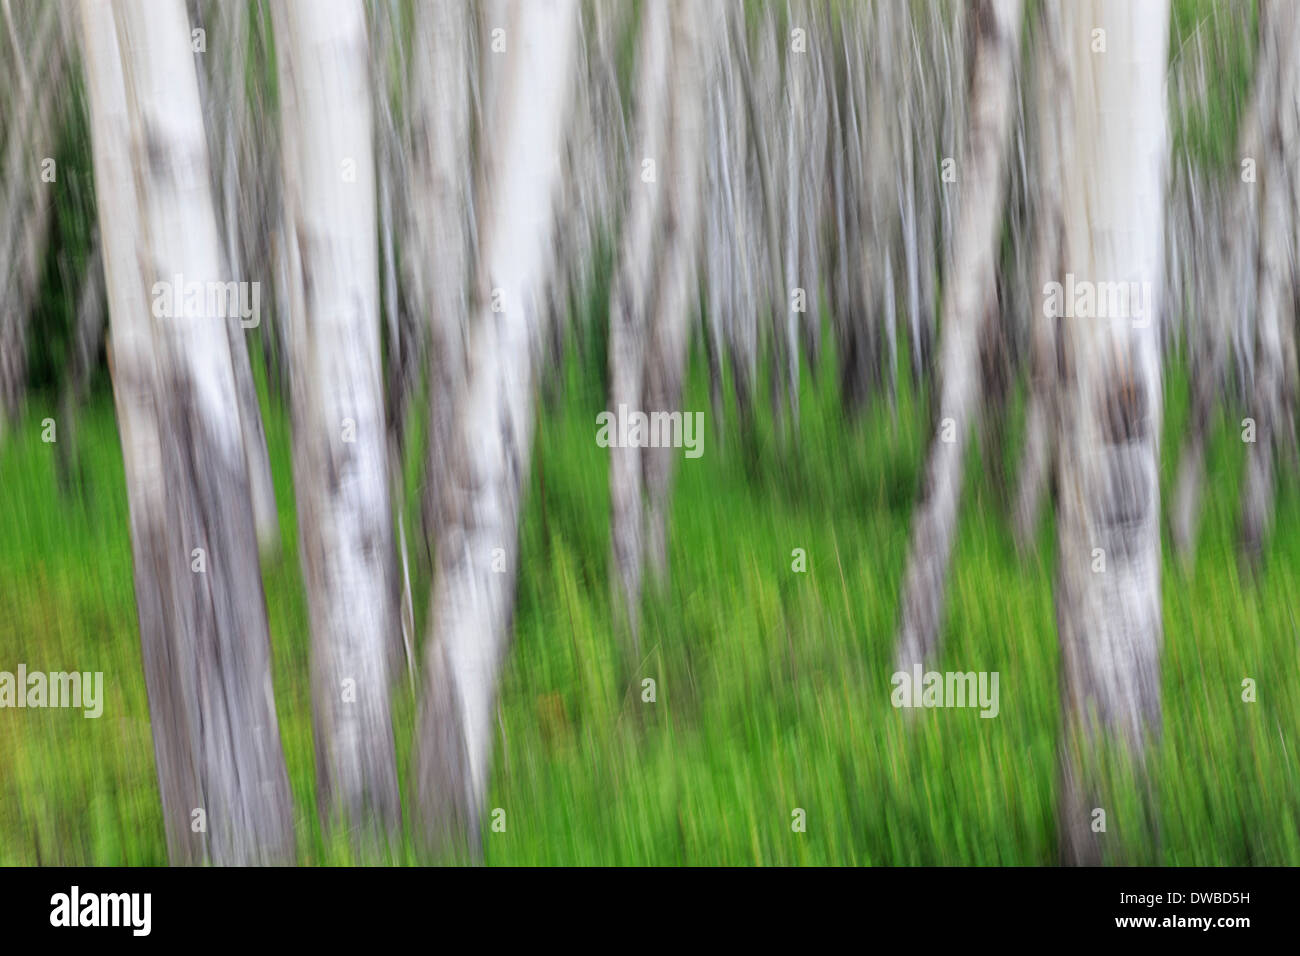 Canada, Alberta, Rocky Mountains, Banff National Park, trunks of birch forest Stock Photo